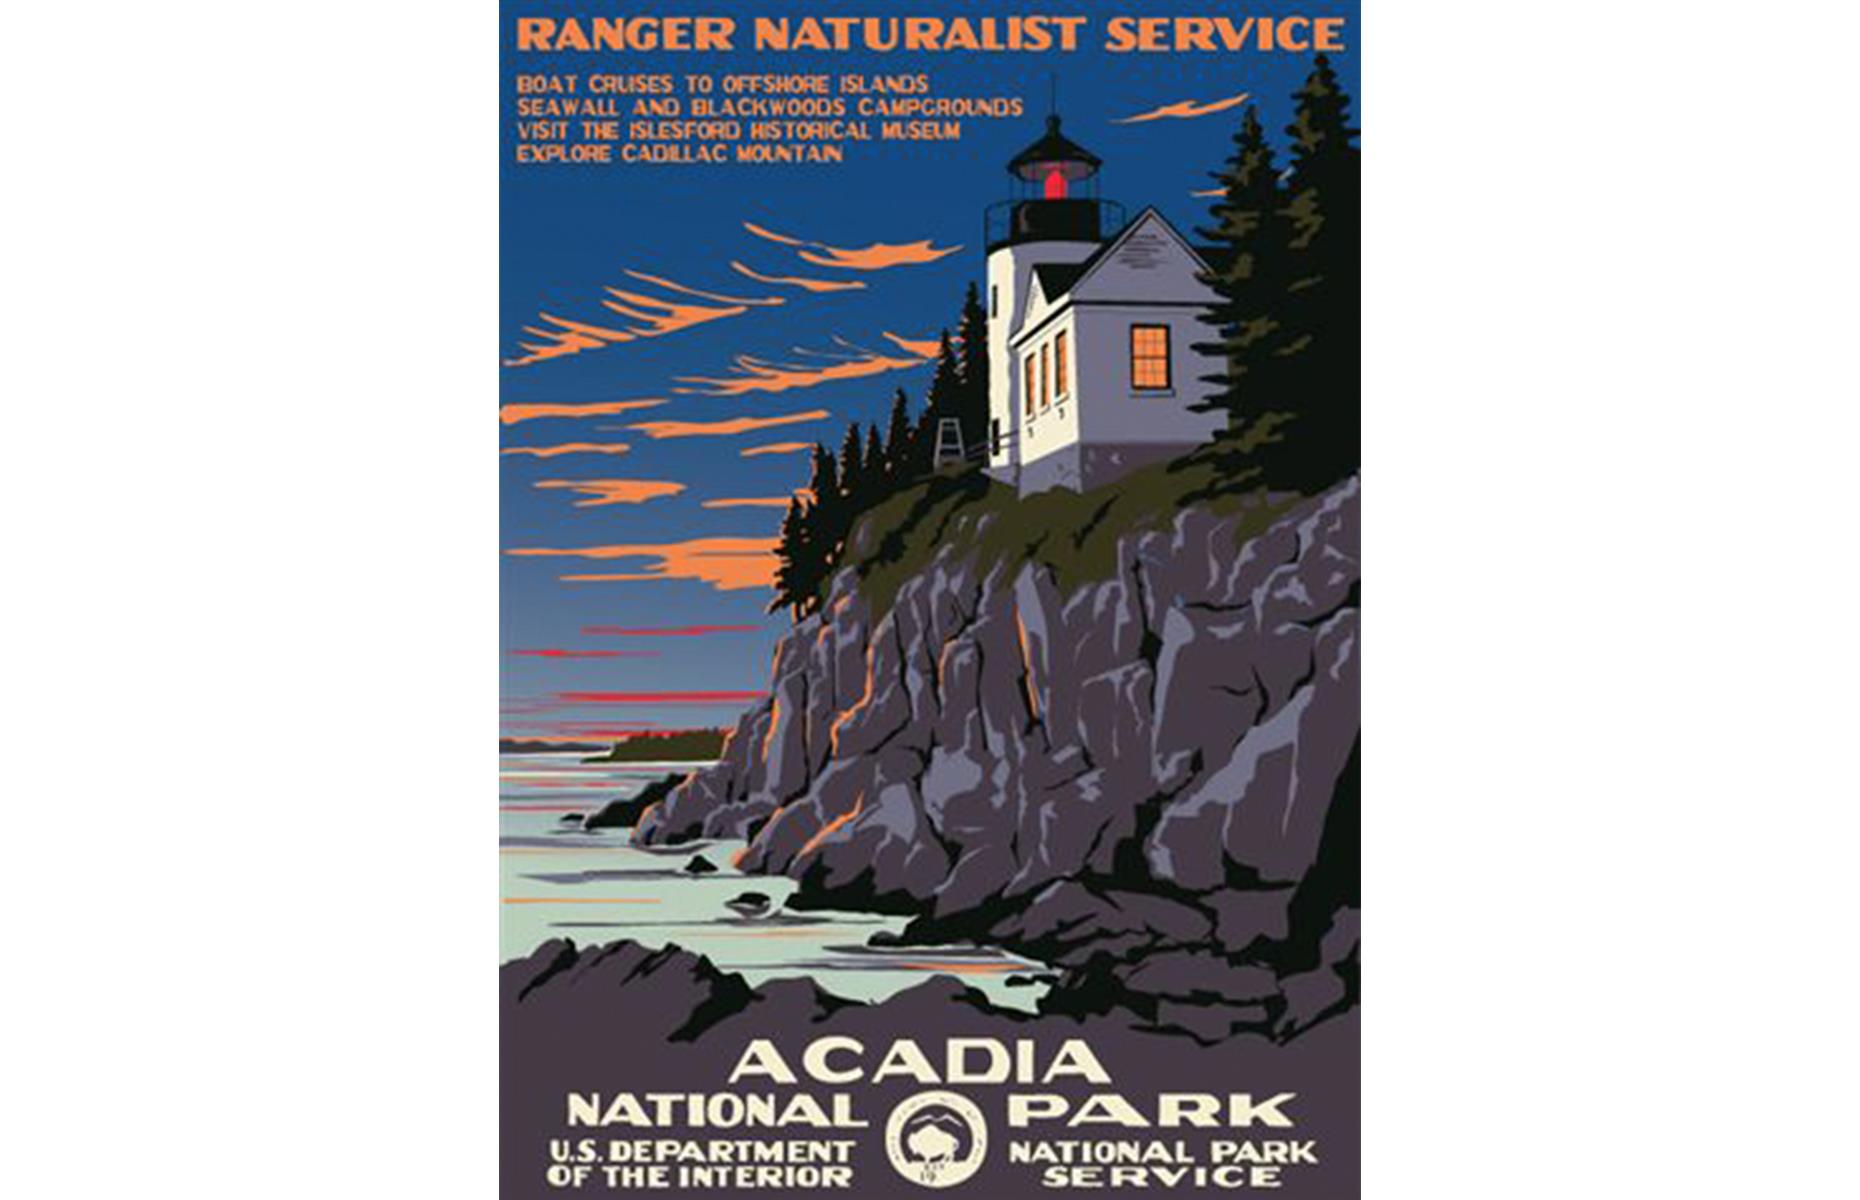 <p>The US Department of the Interior has put out hundreds of promotional posters over the decades, celebrating America's incredible wildernesses and natural wonders. Here the spotlight is on Acadia National Park, with the Bass Harbor Head Lighthouse brooding on rocky shores. </p>  <p><a href="https://www.loveexploring.com/galleries/87044/americas-most-beautiful-lighthouses-you-can-visit?page=1"><strong>See more of America's most beautiful lighthouses here</strong></a></p>